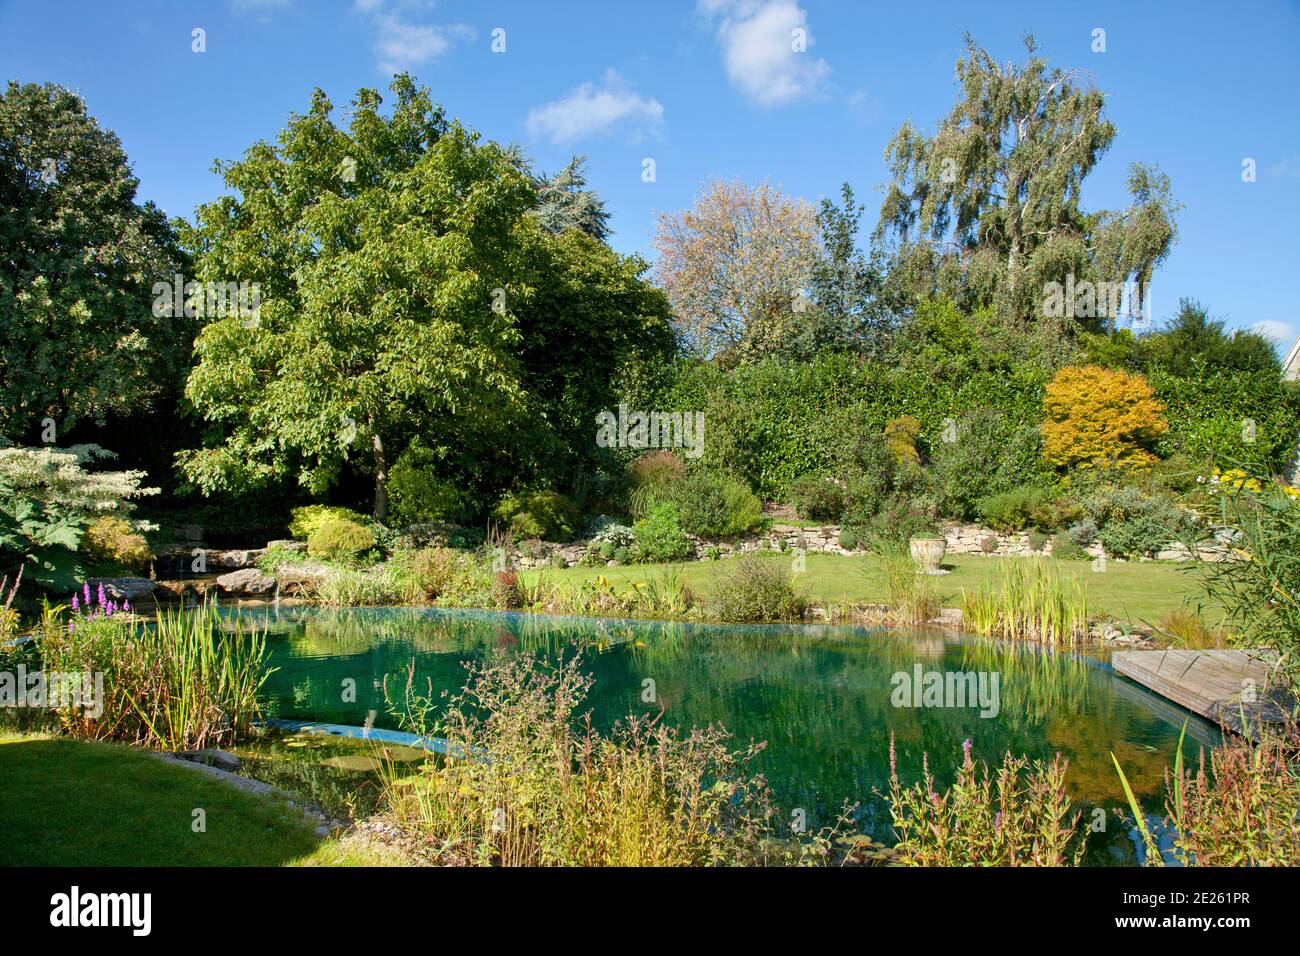 Swimming pond, or natural pool, in private garden with lawn and trees Stock Photo